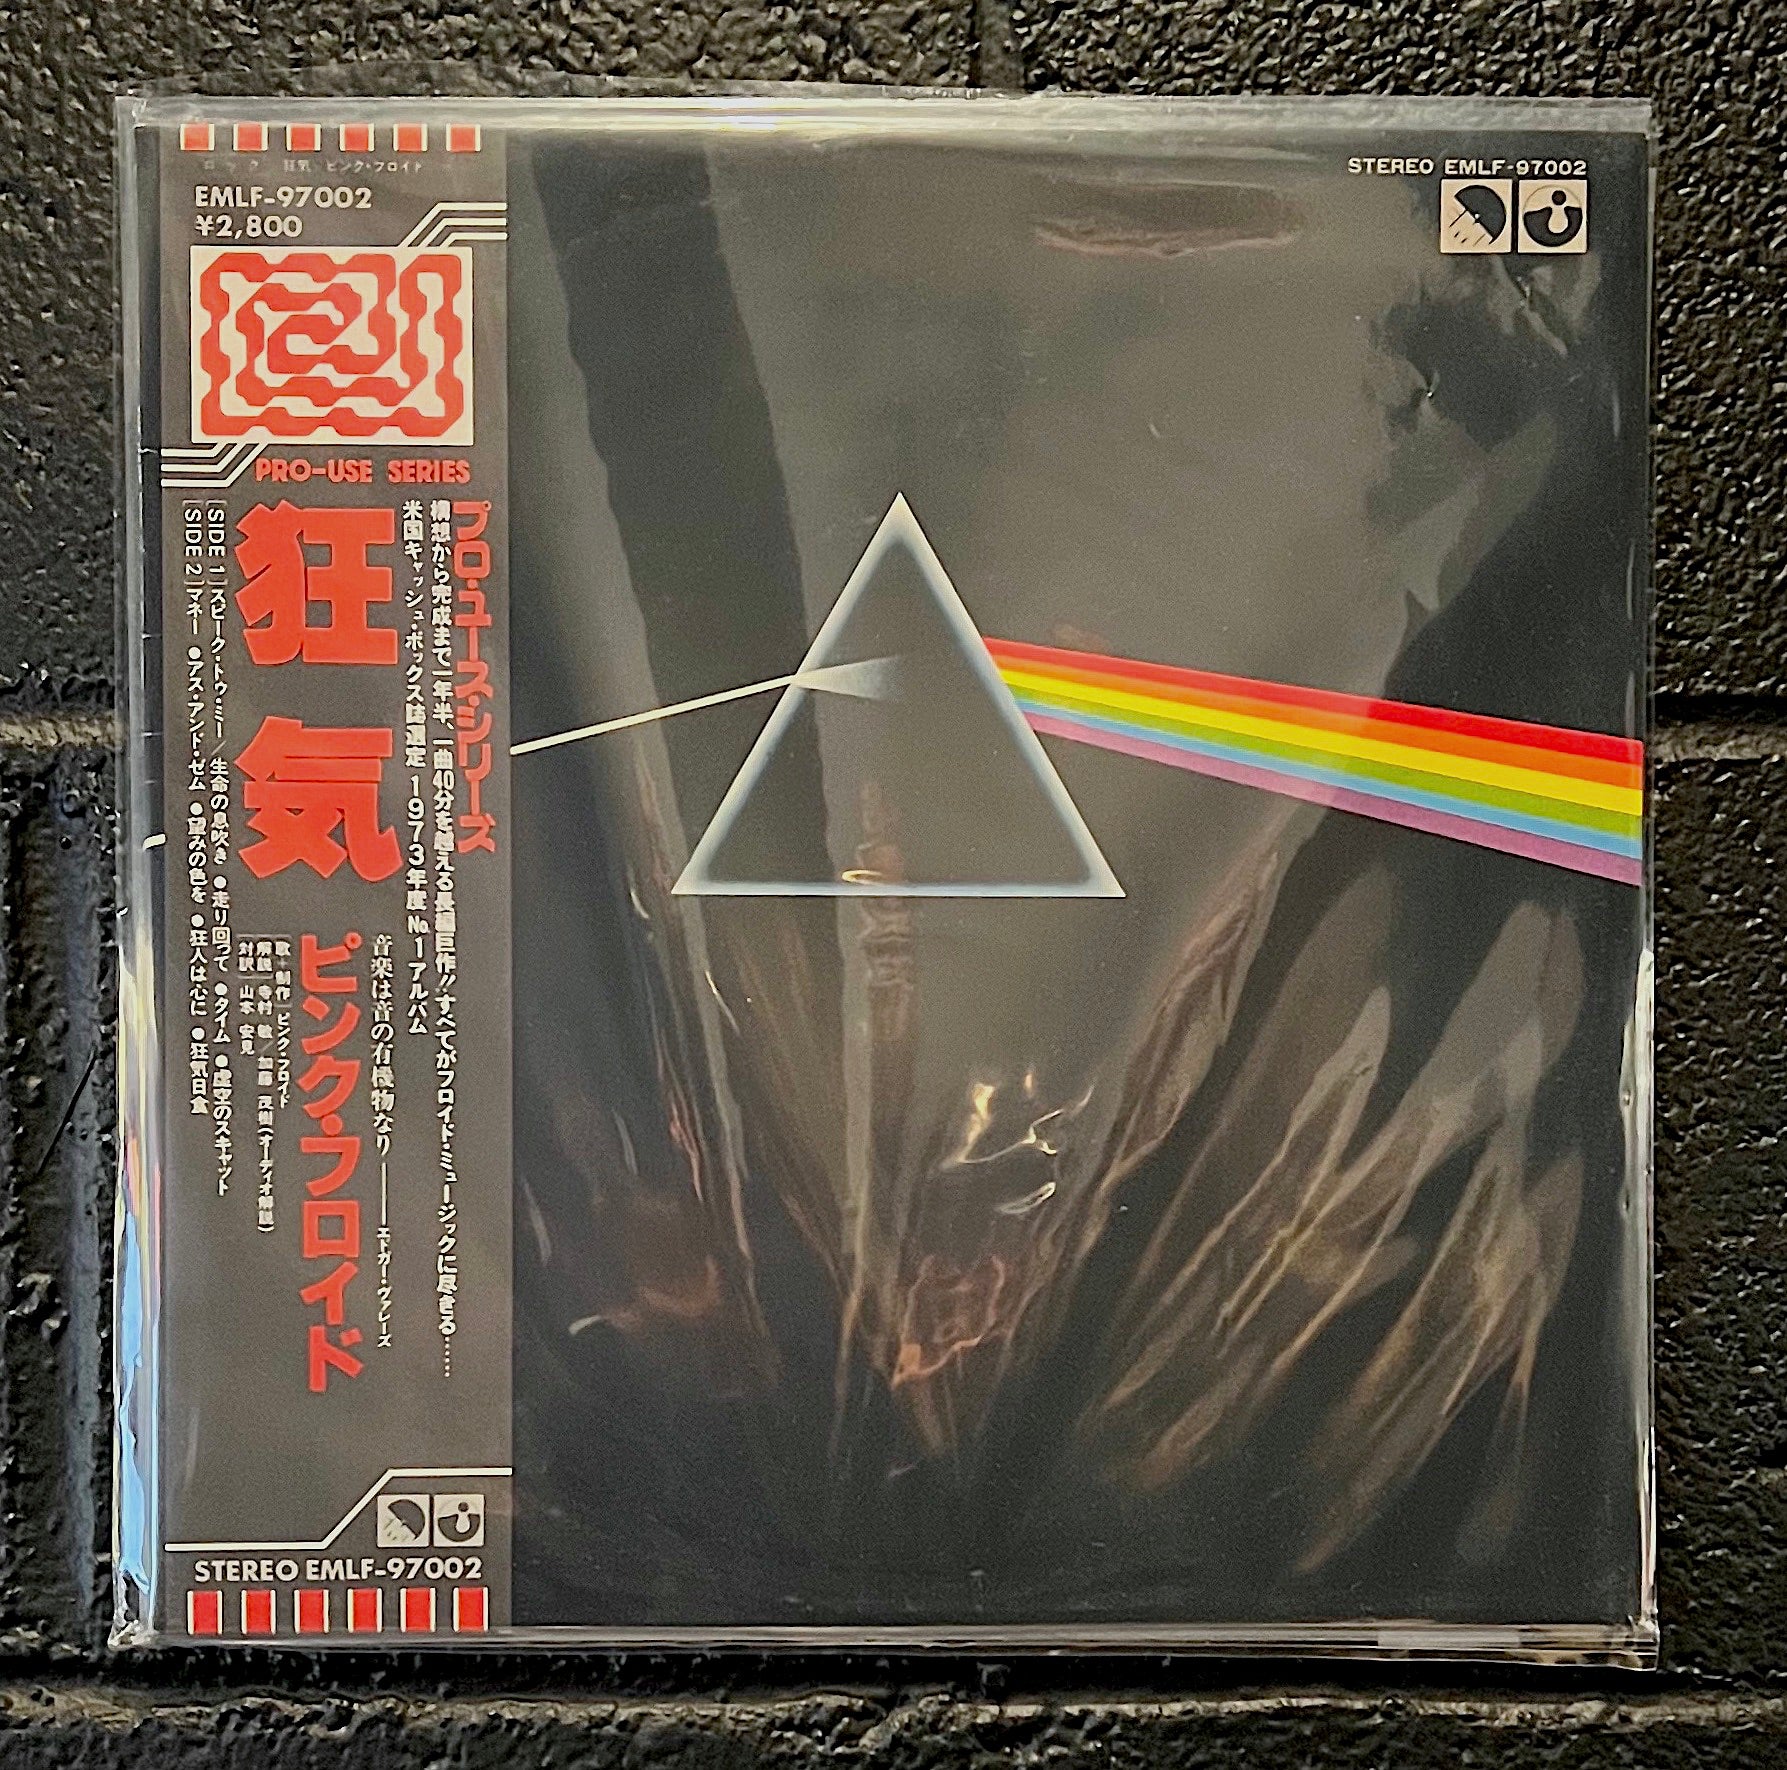 The Dark Side of the Moon - Japanese Pro-Use audiophile LP with obi